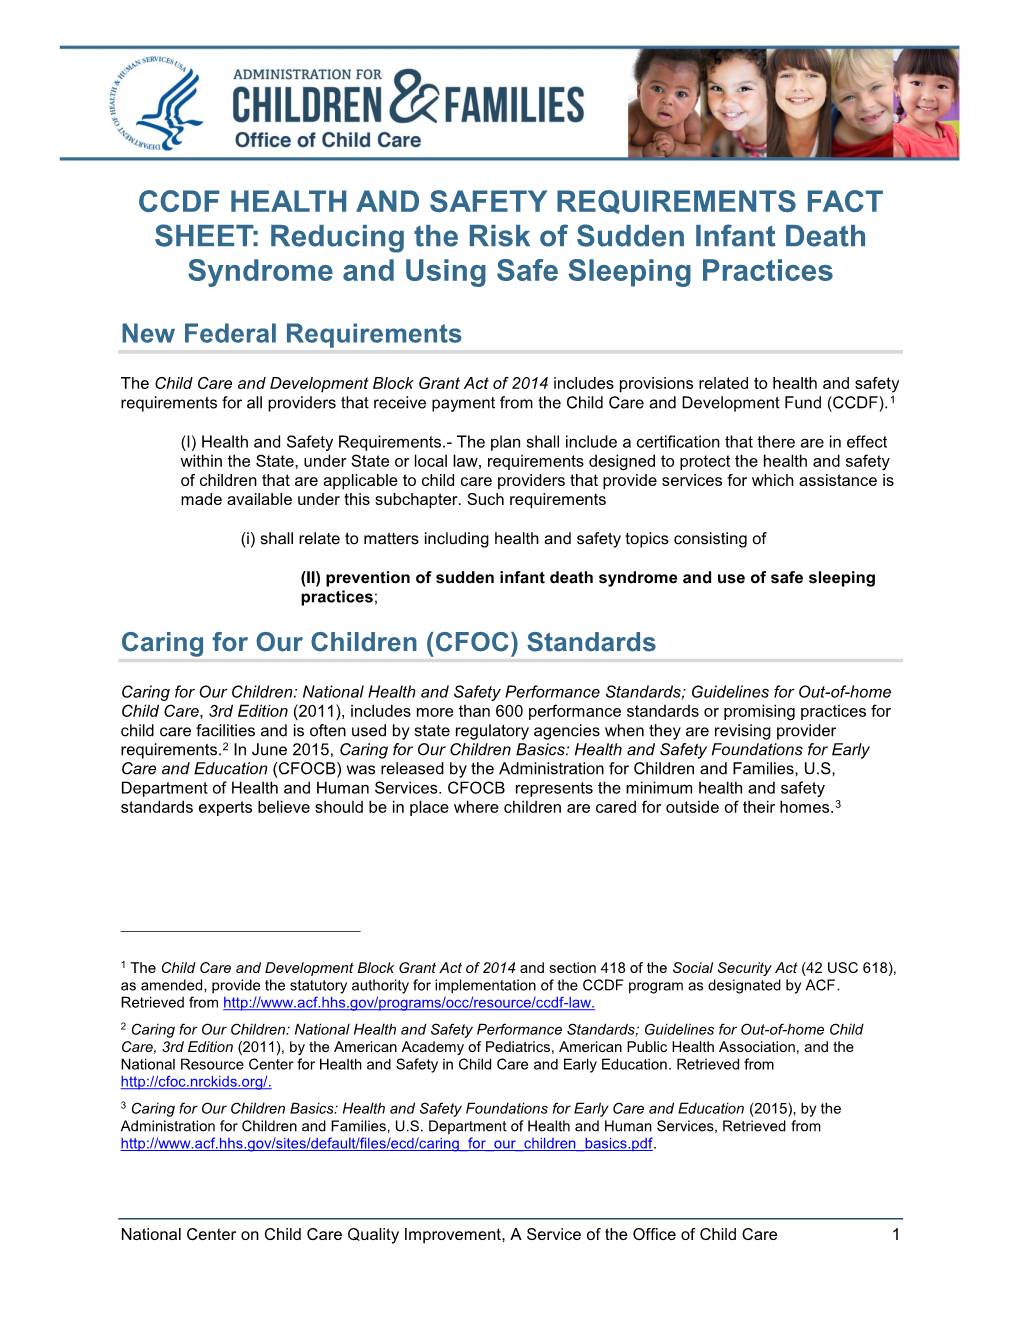 CCDF HEALTH and SAFETY REQUIREMENTS FACT SHEET: Reducing the Risk of Sudden Infant Death Syndrome and Using Safe Sleeping Practices